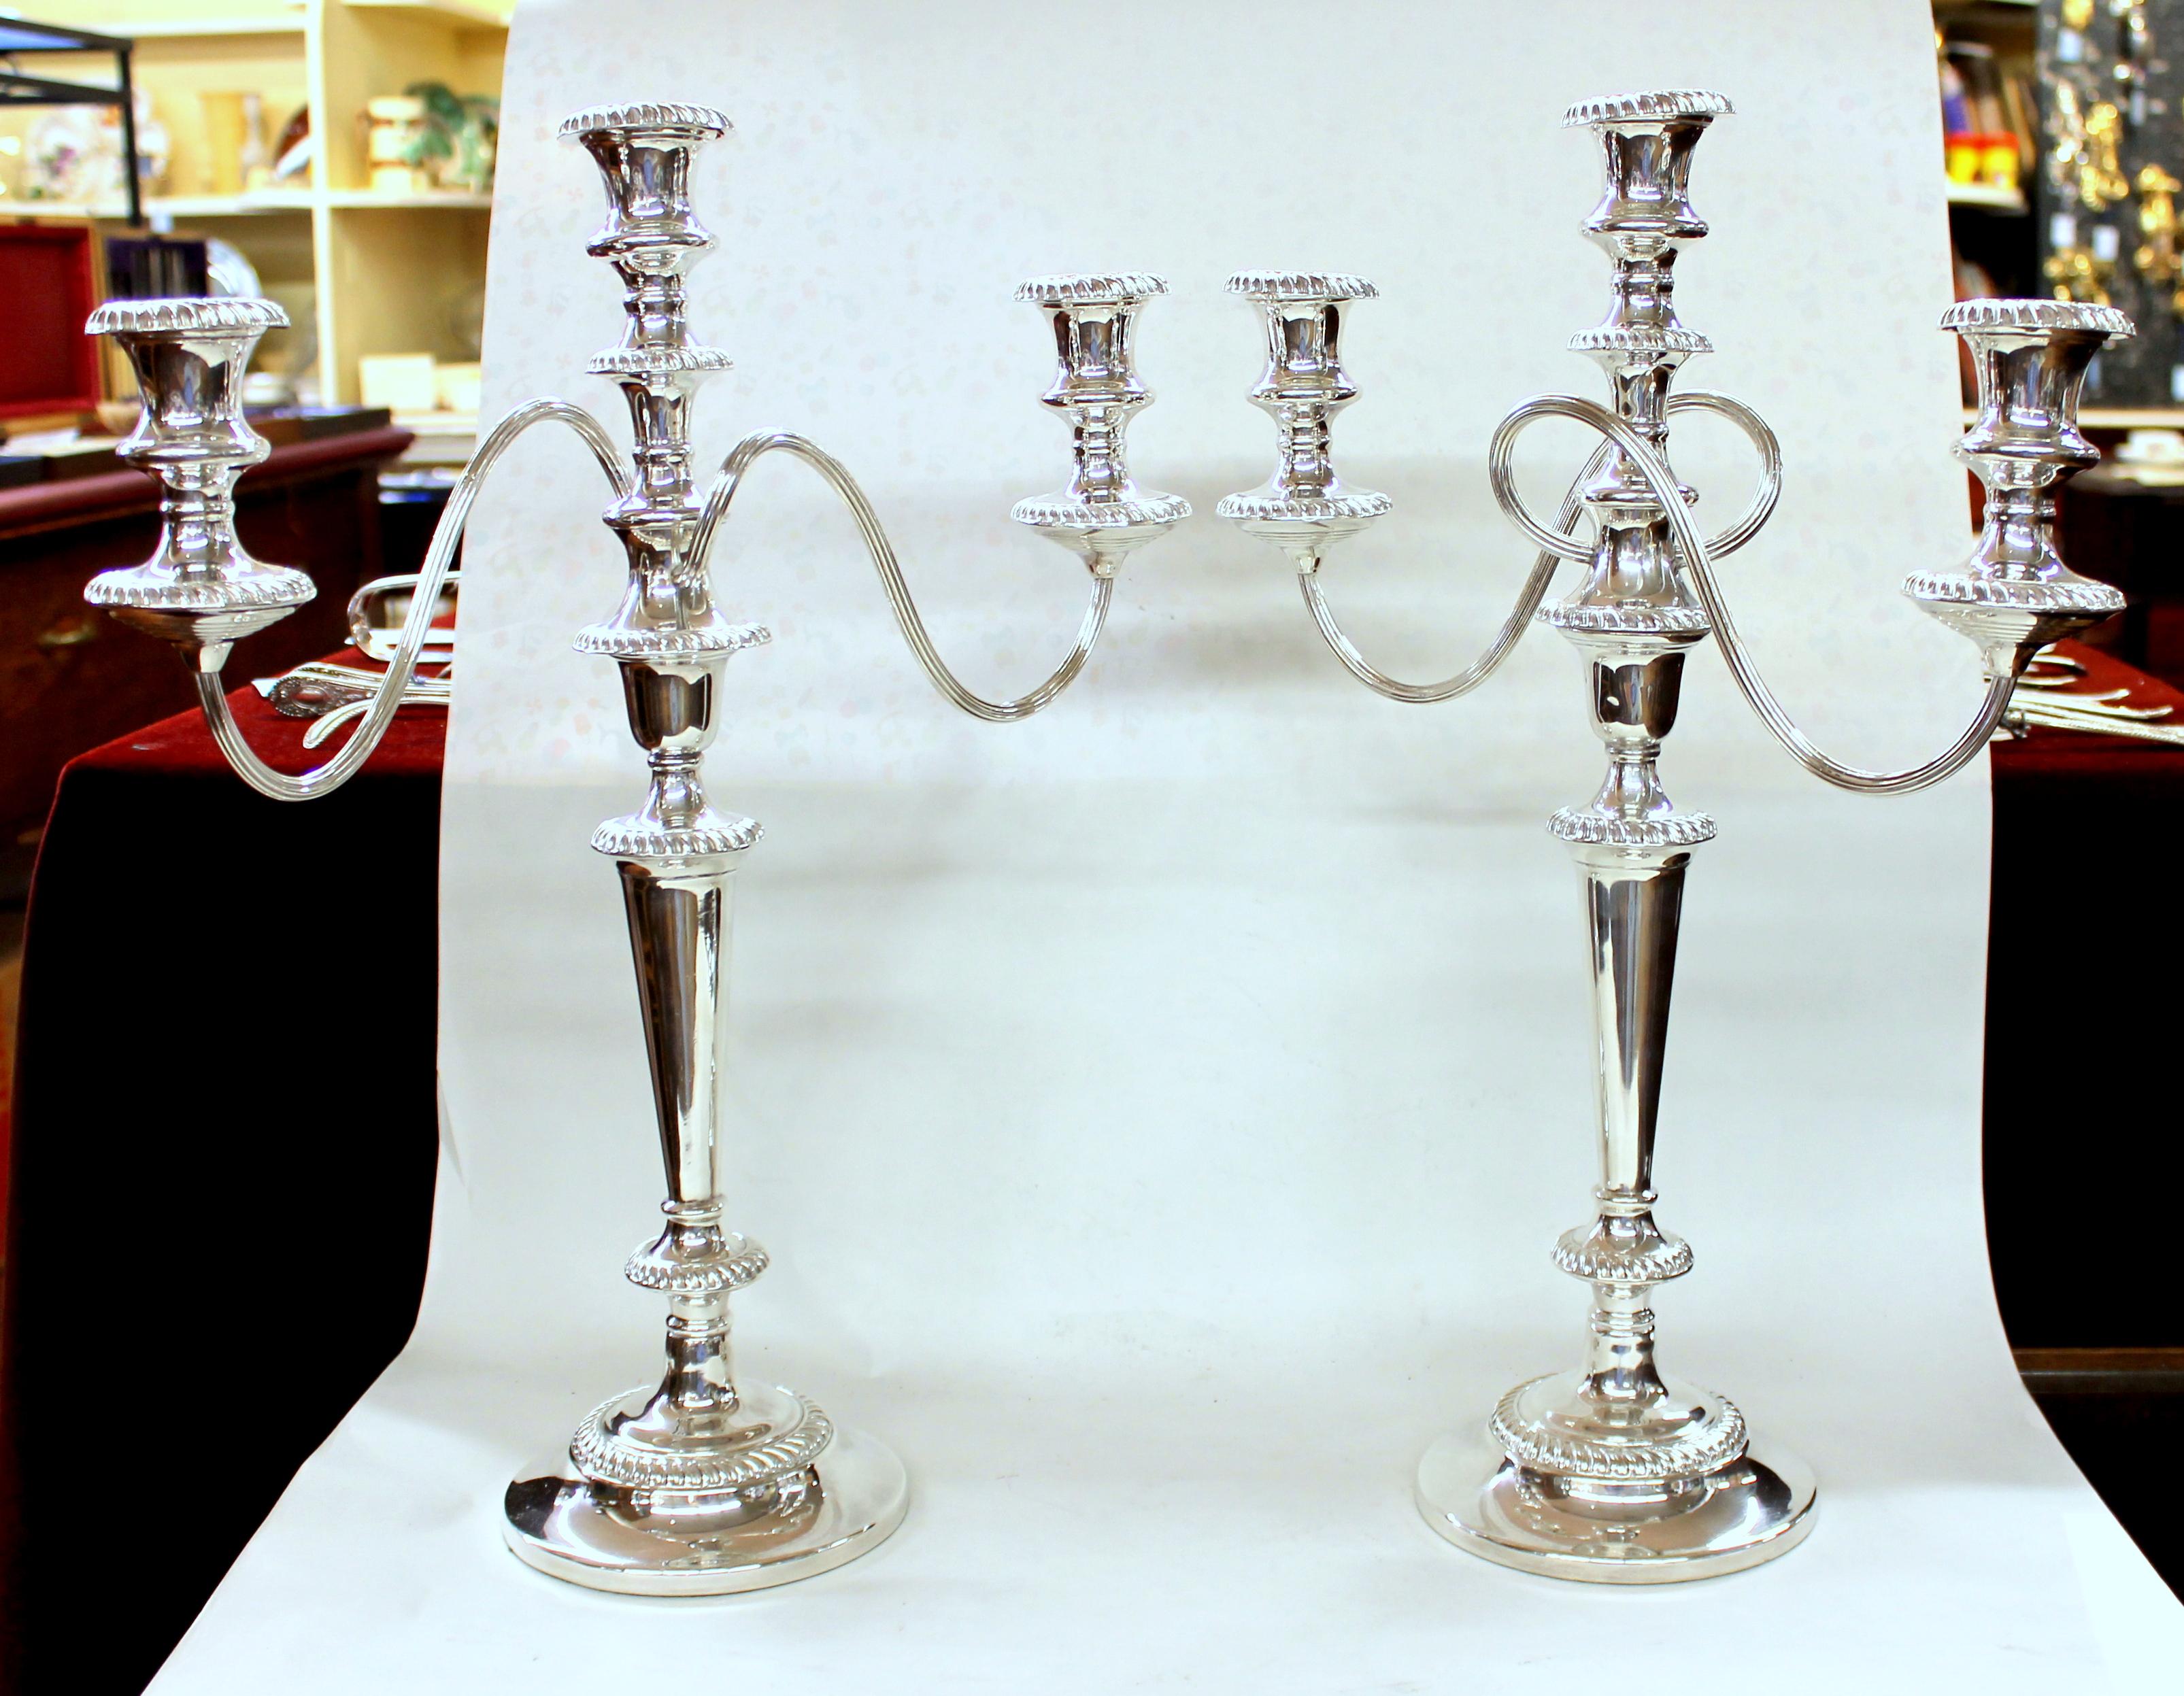 Pair of fine quality old English silver plate Large Gadroon Border Geo. III Style three-light candelabra in the design by Matthew Boulton.
(Maker's marks not found).

18 1/2